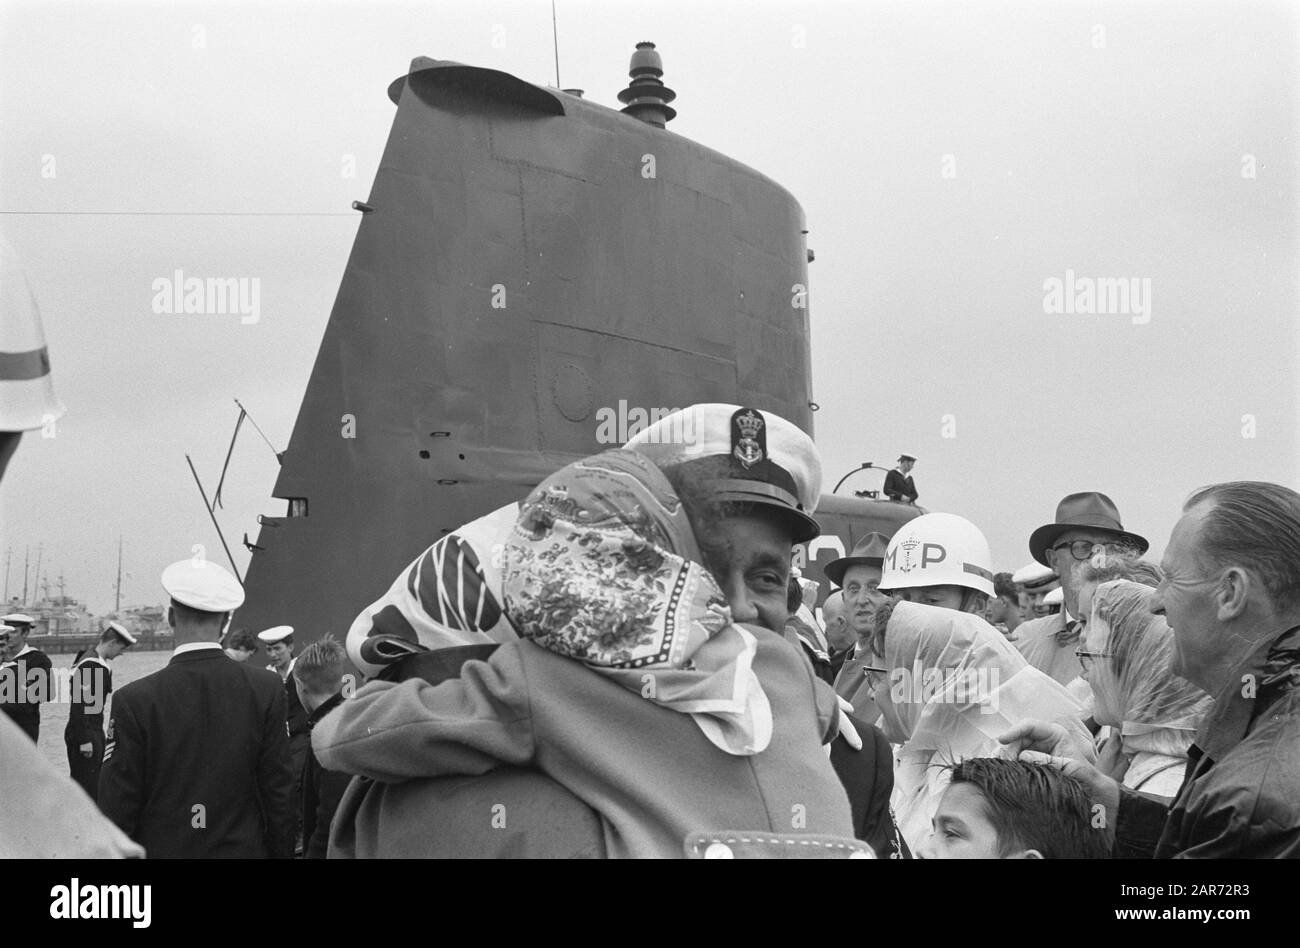 Submarine Sea lion back from New Guinea Date: September 12, 1962 Location:  New Guinea Keywords: submarines Institution name: HM Sea Lion Stock Photo -  Alamy